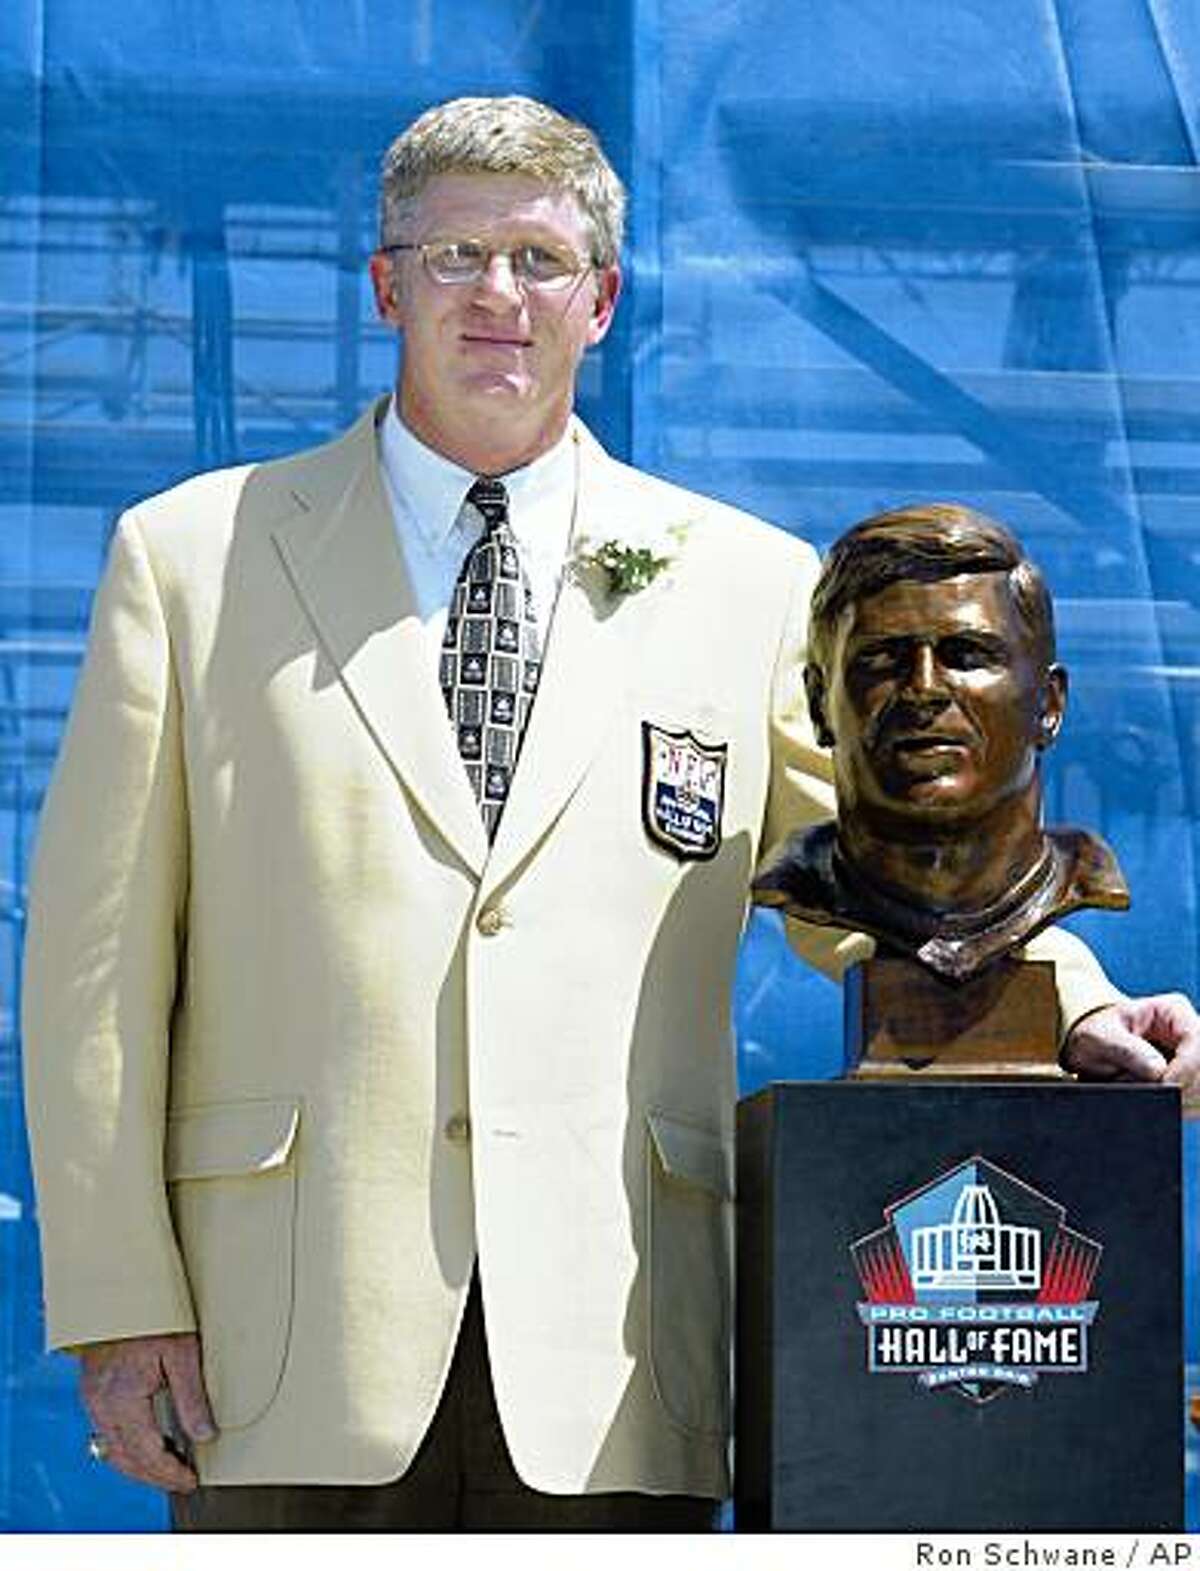 Former Oakland Raiders great Dave Casper poses with his bust after enshrinement into the Pro Football Hall of Fame in Canton, Ohio, Saturday, Aug. 3, 2002. (AP Photo/Ron Schwane)